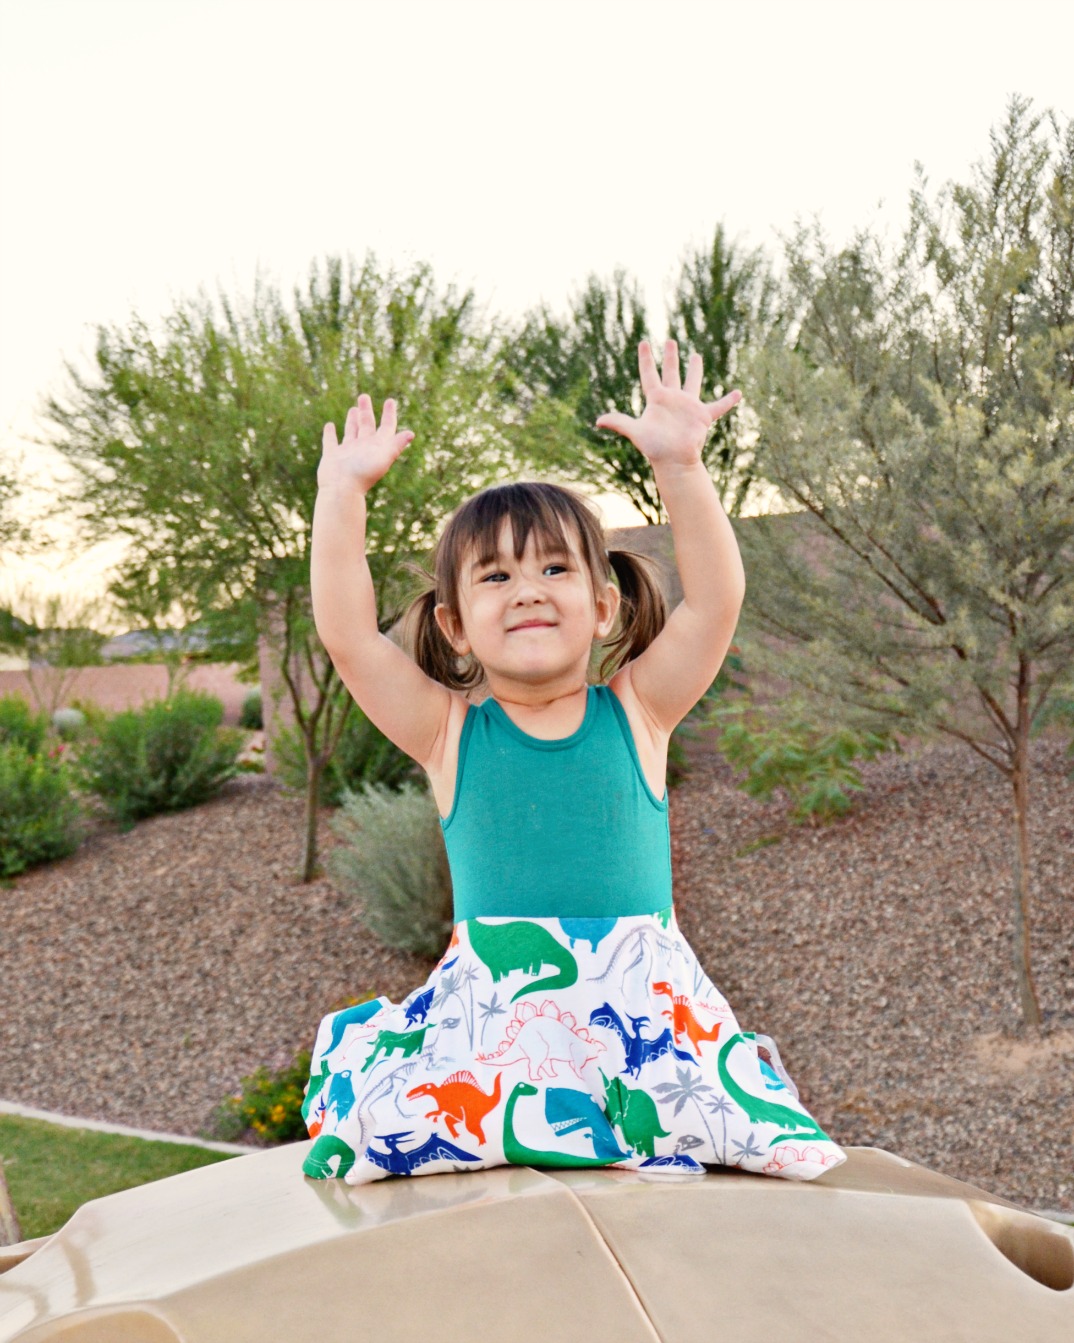 Because girls are awesome and so are dinosaurs, save 20% on clothing from Princess Awesome, the company that empowers girls to wear what they love.